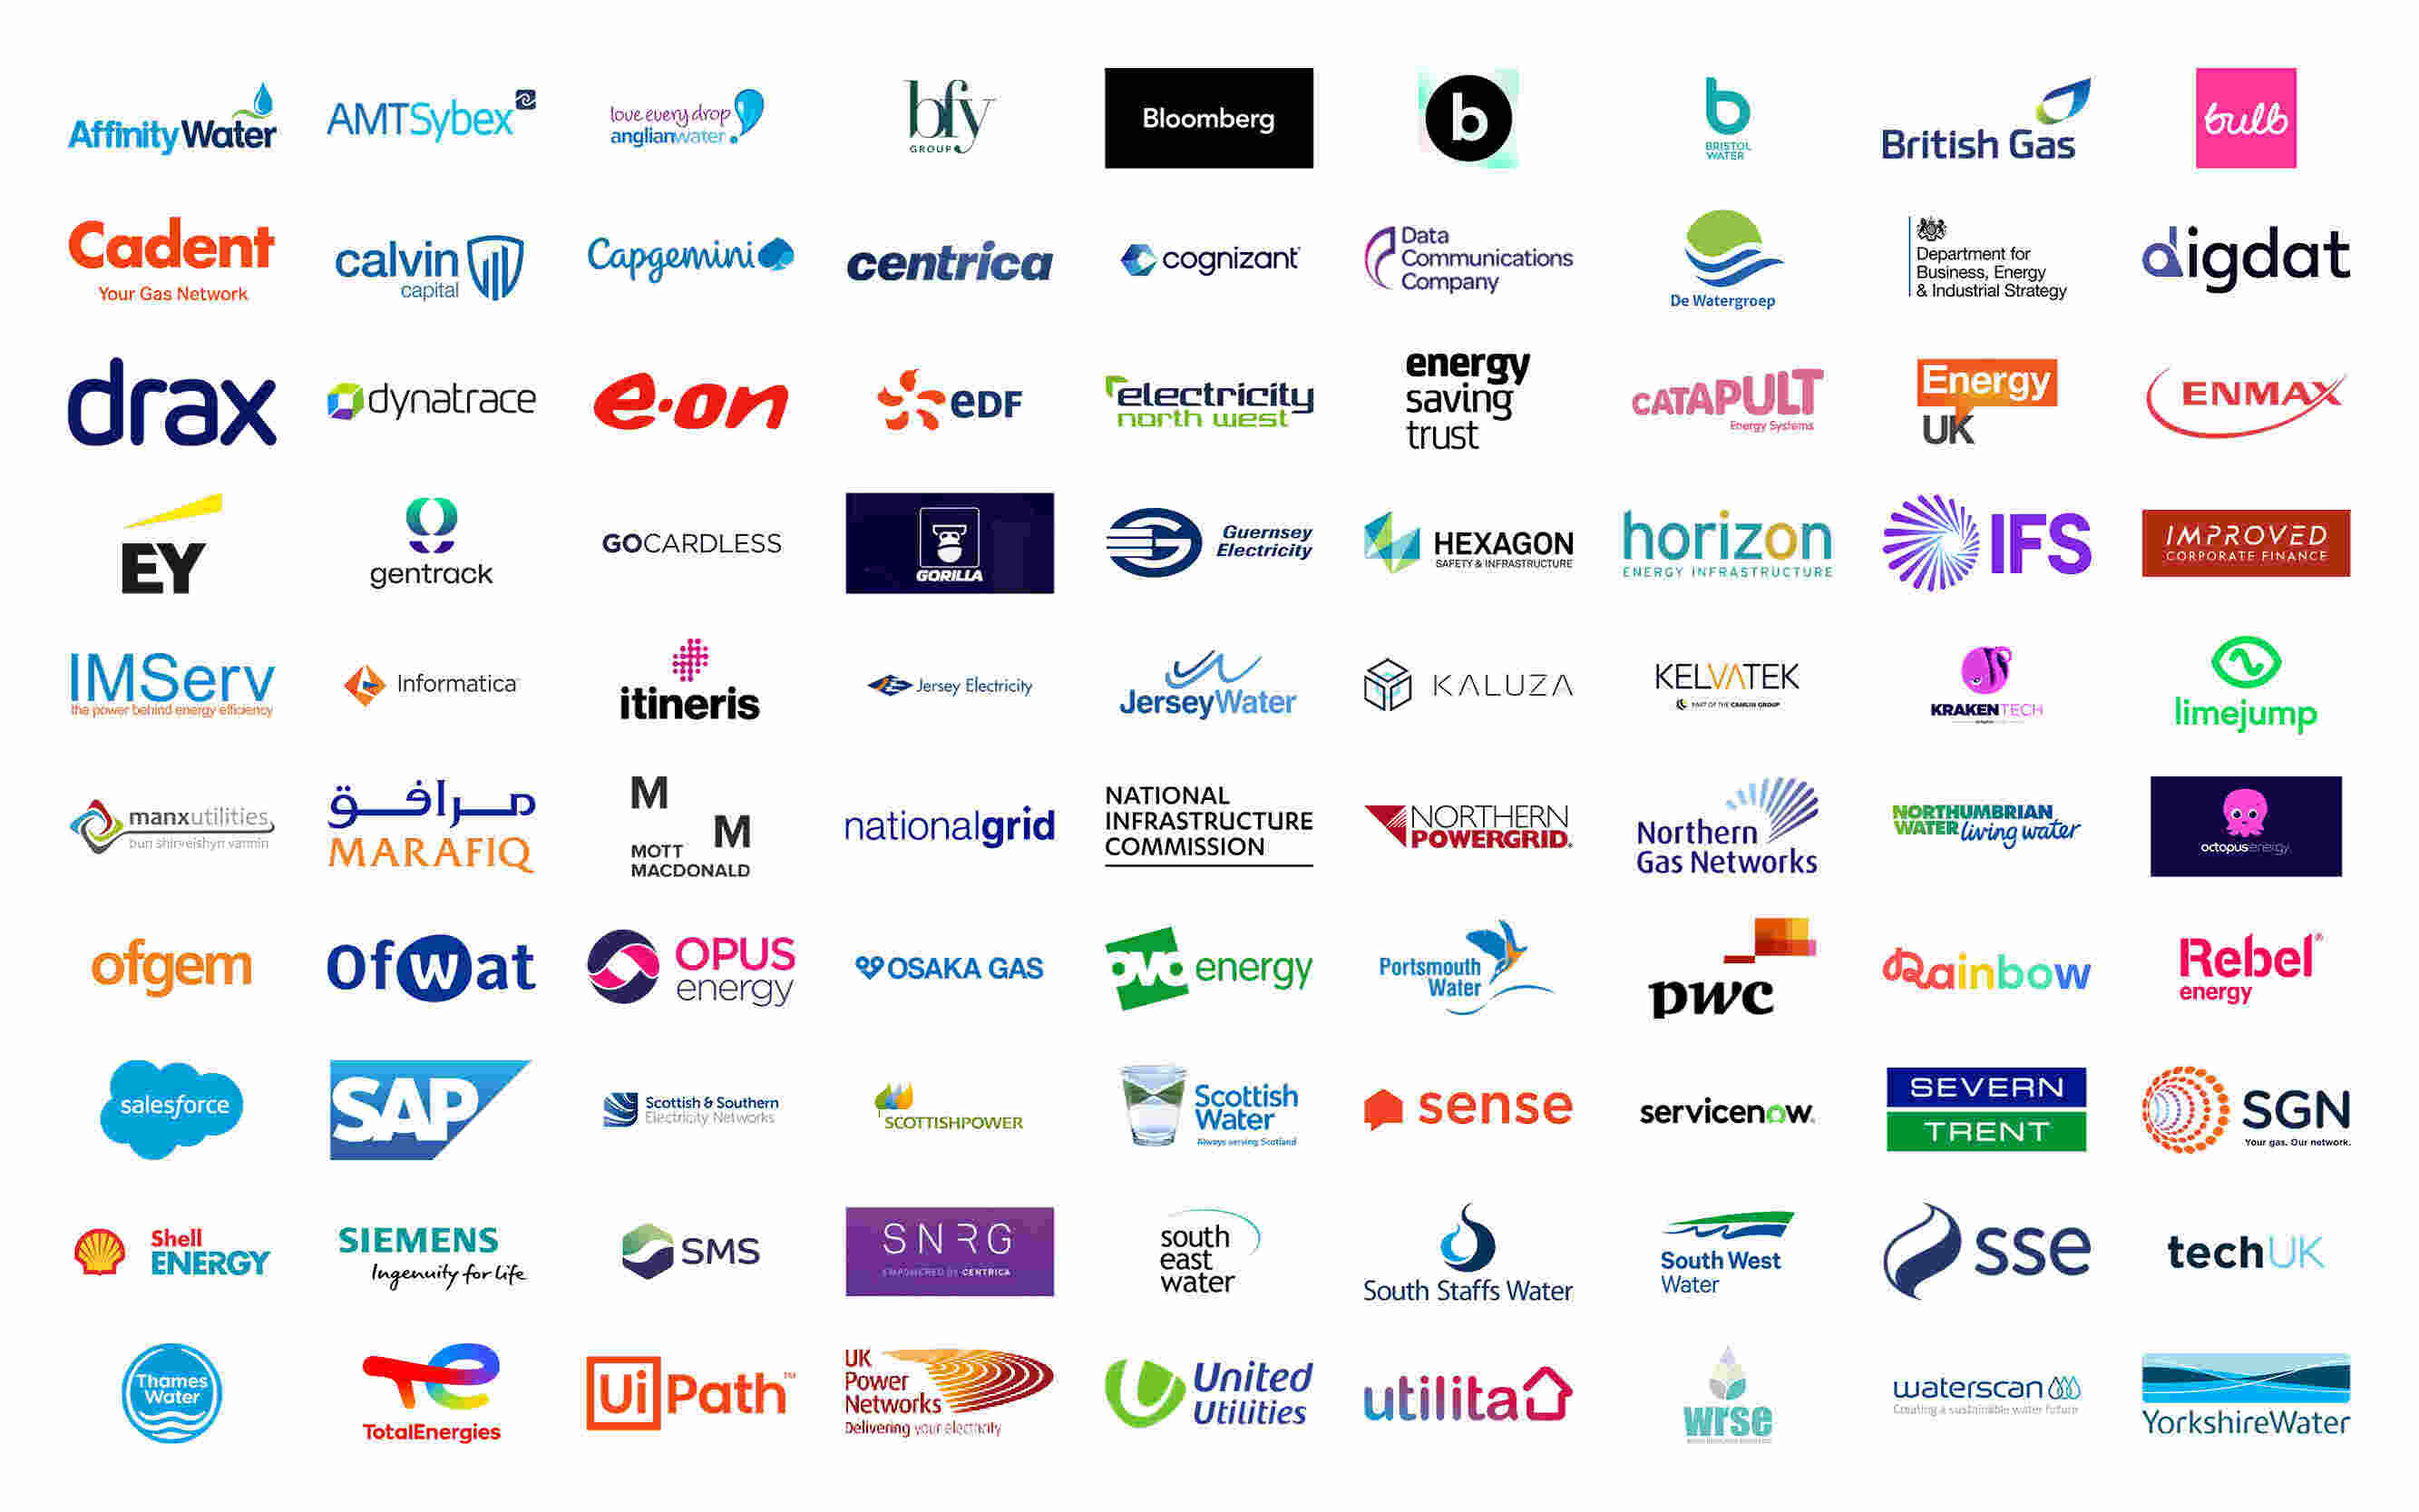 Who Attends Future of Utilities Summit (UK premier utilities conference)